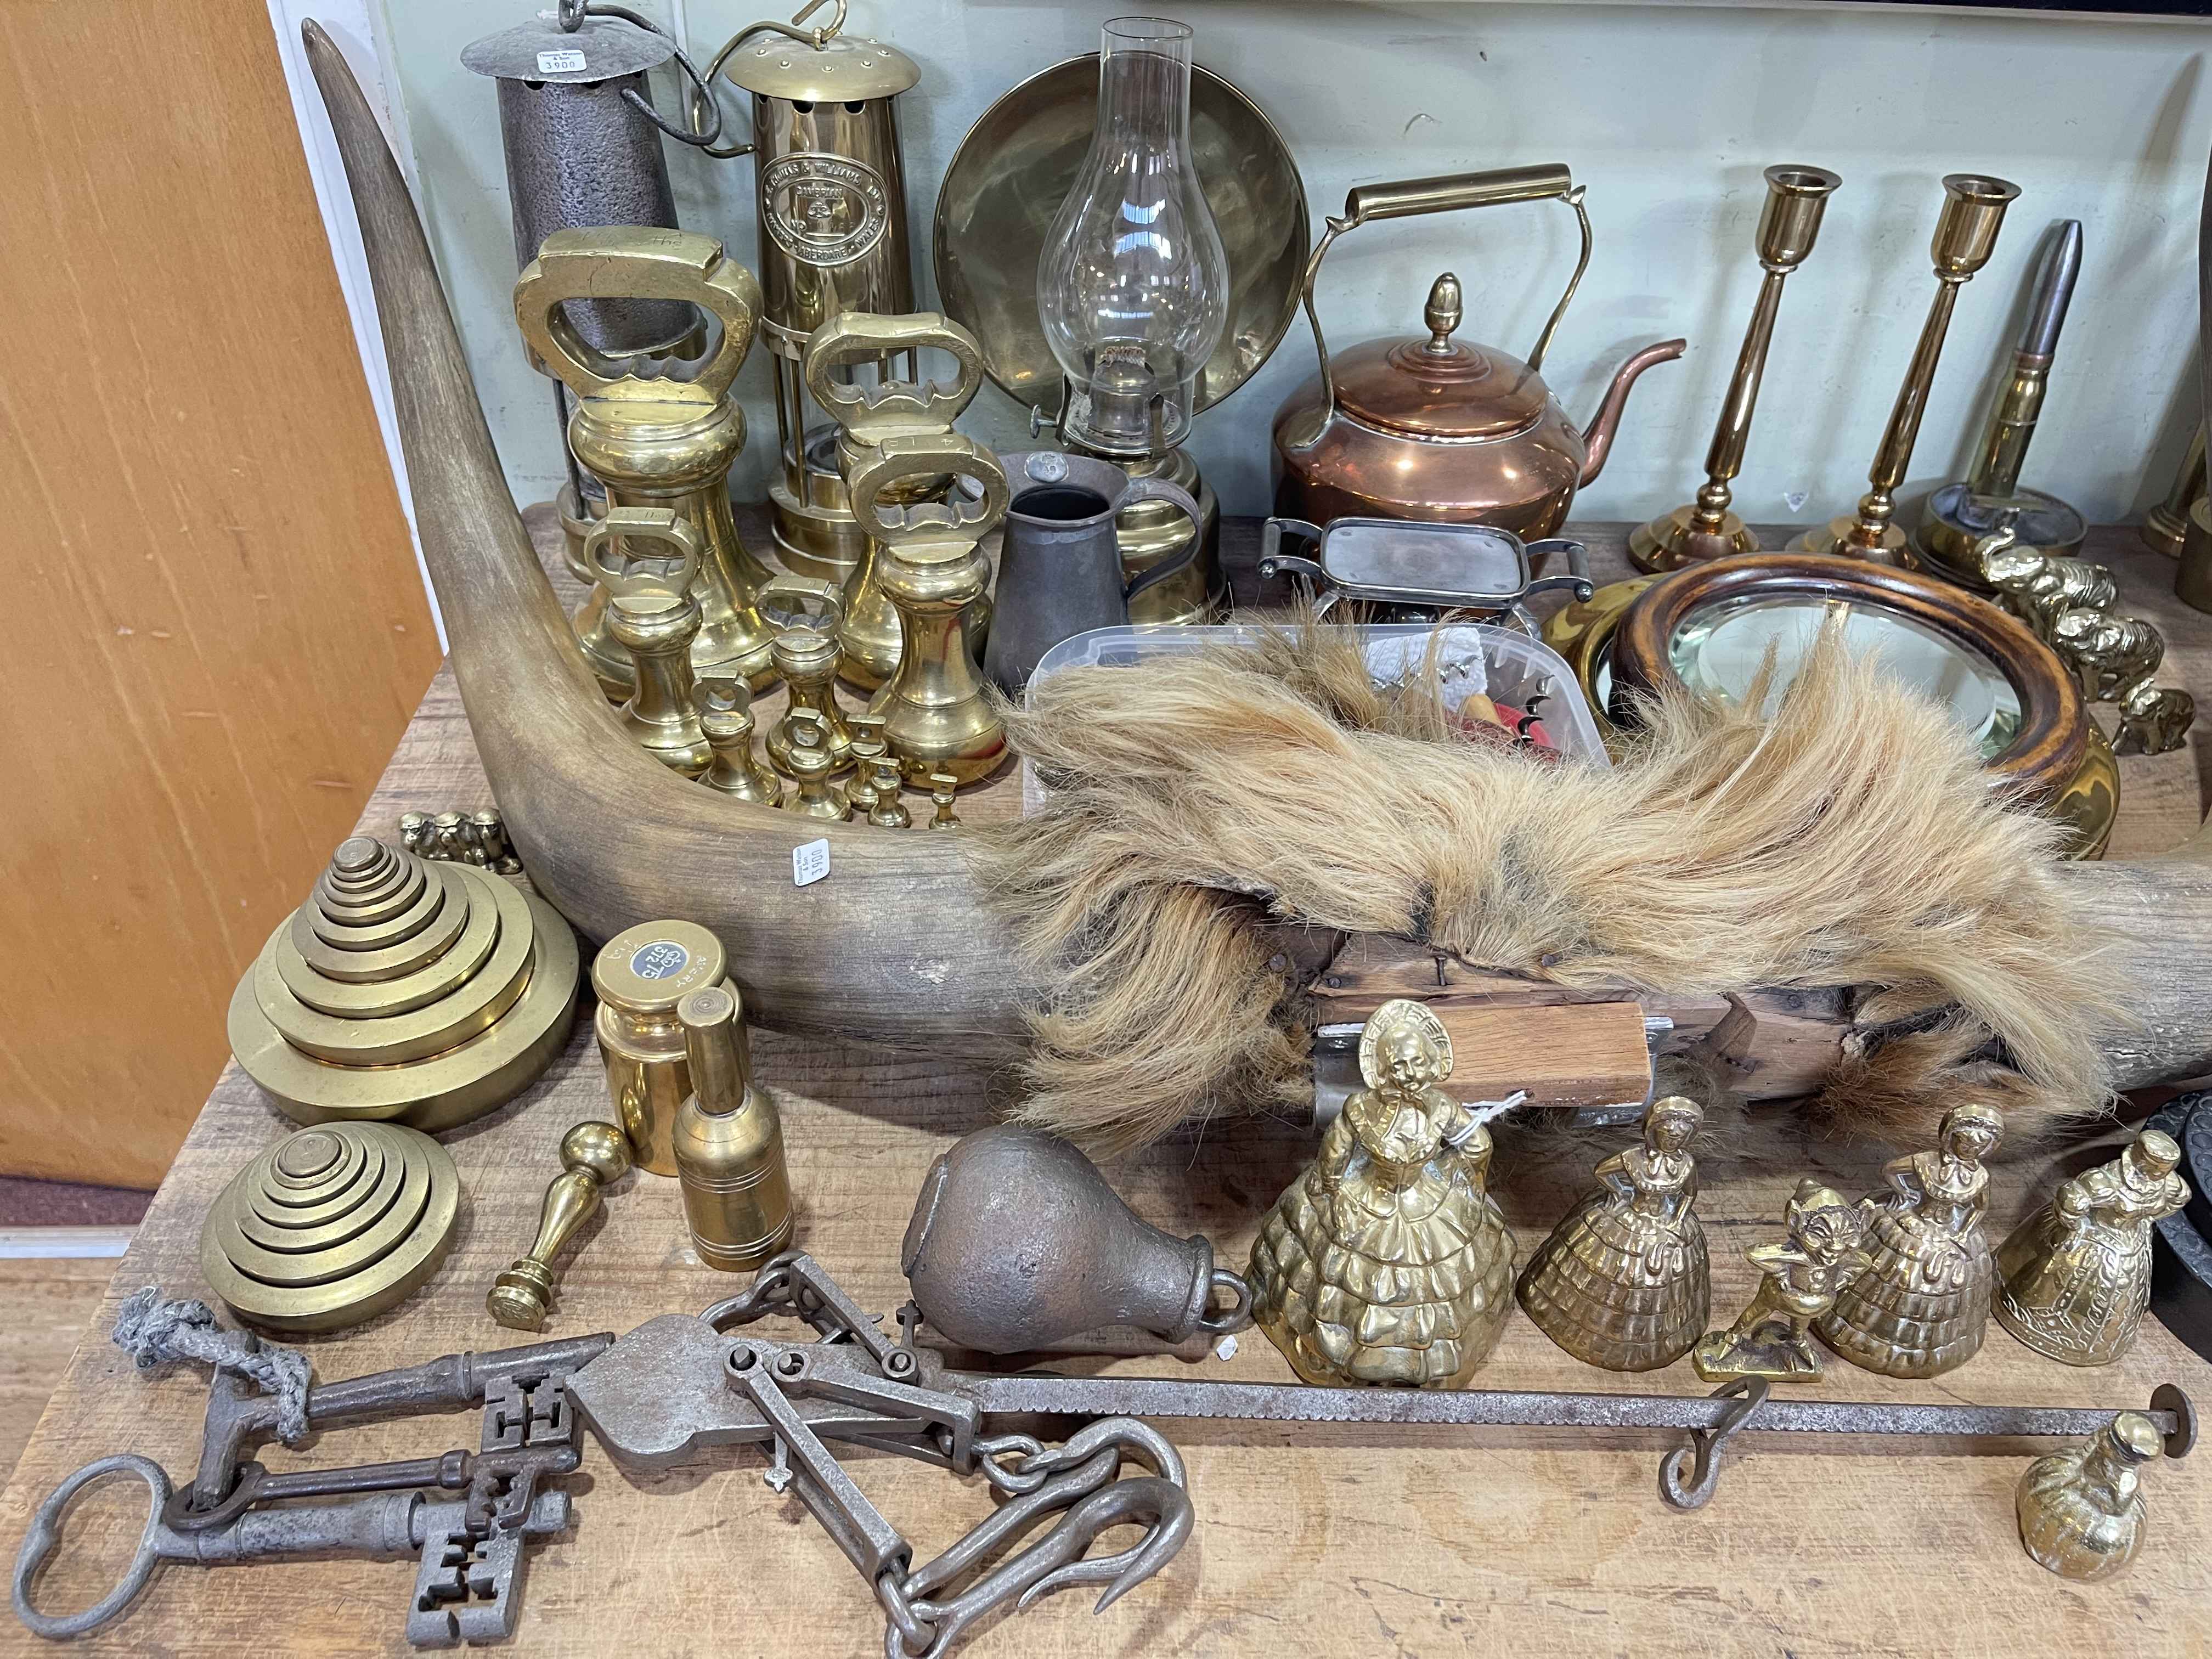 Collection of metalwares including miners lamps, bell weights, ship's mirror, trench art, - Image 2 of 3